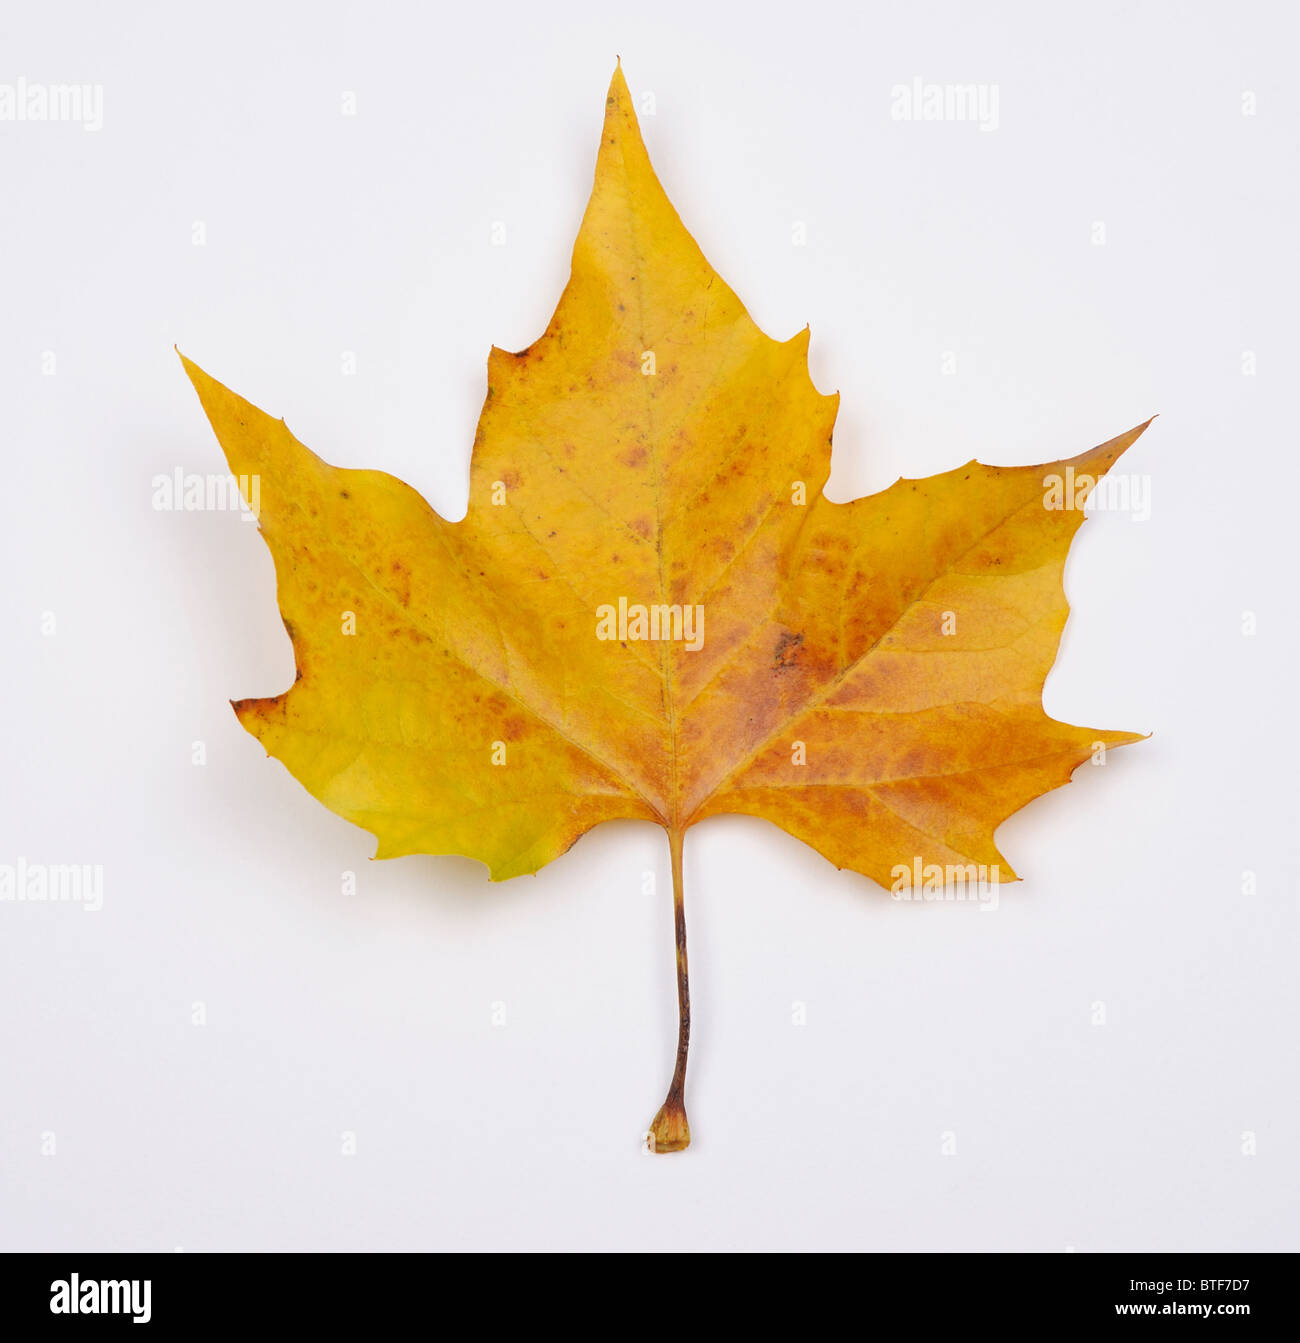 Autumn leaf from a Plane tree. Stock Photo